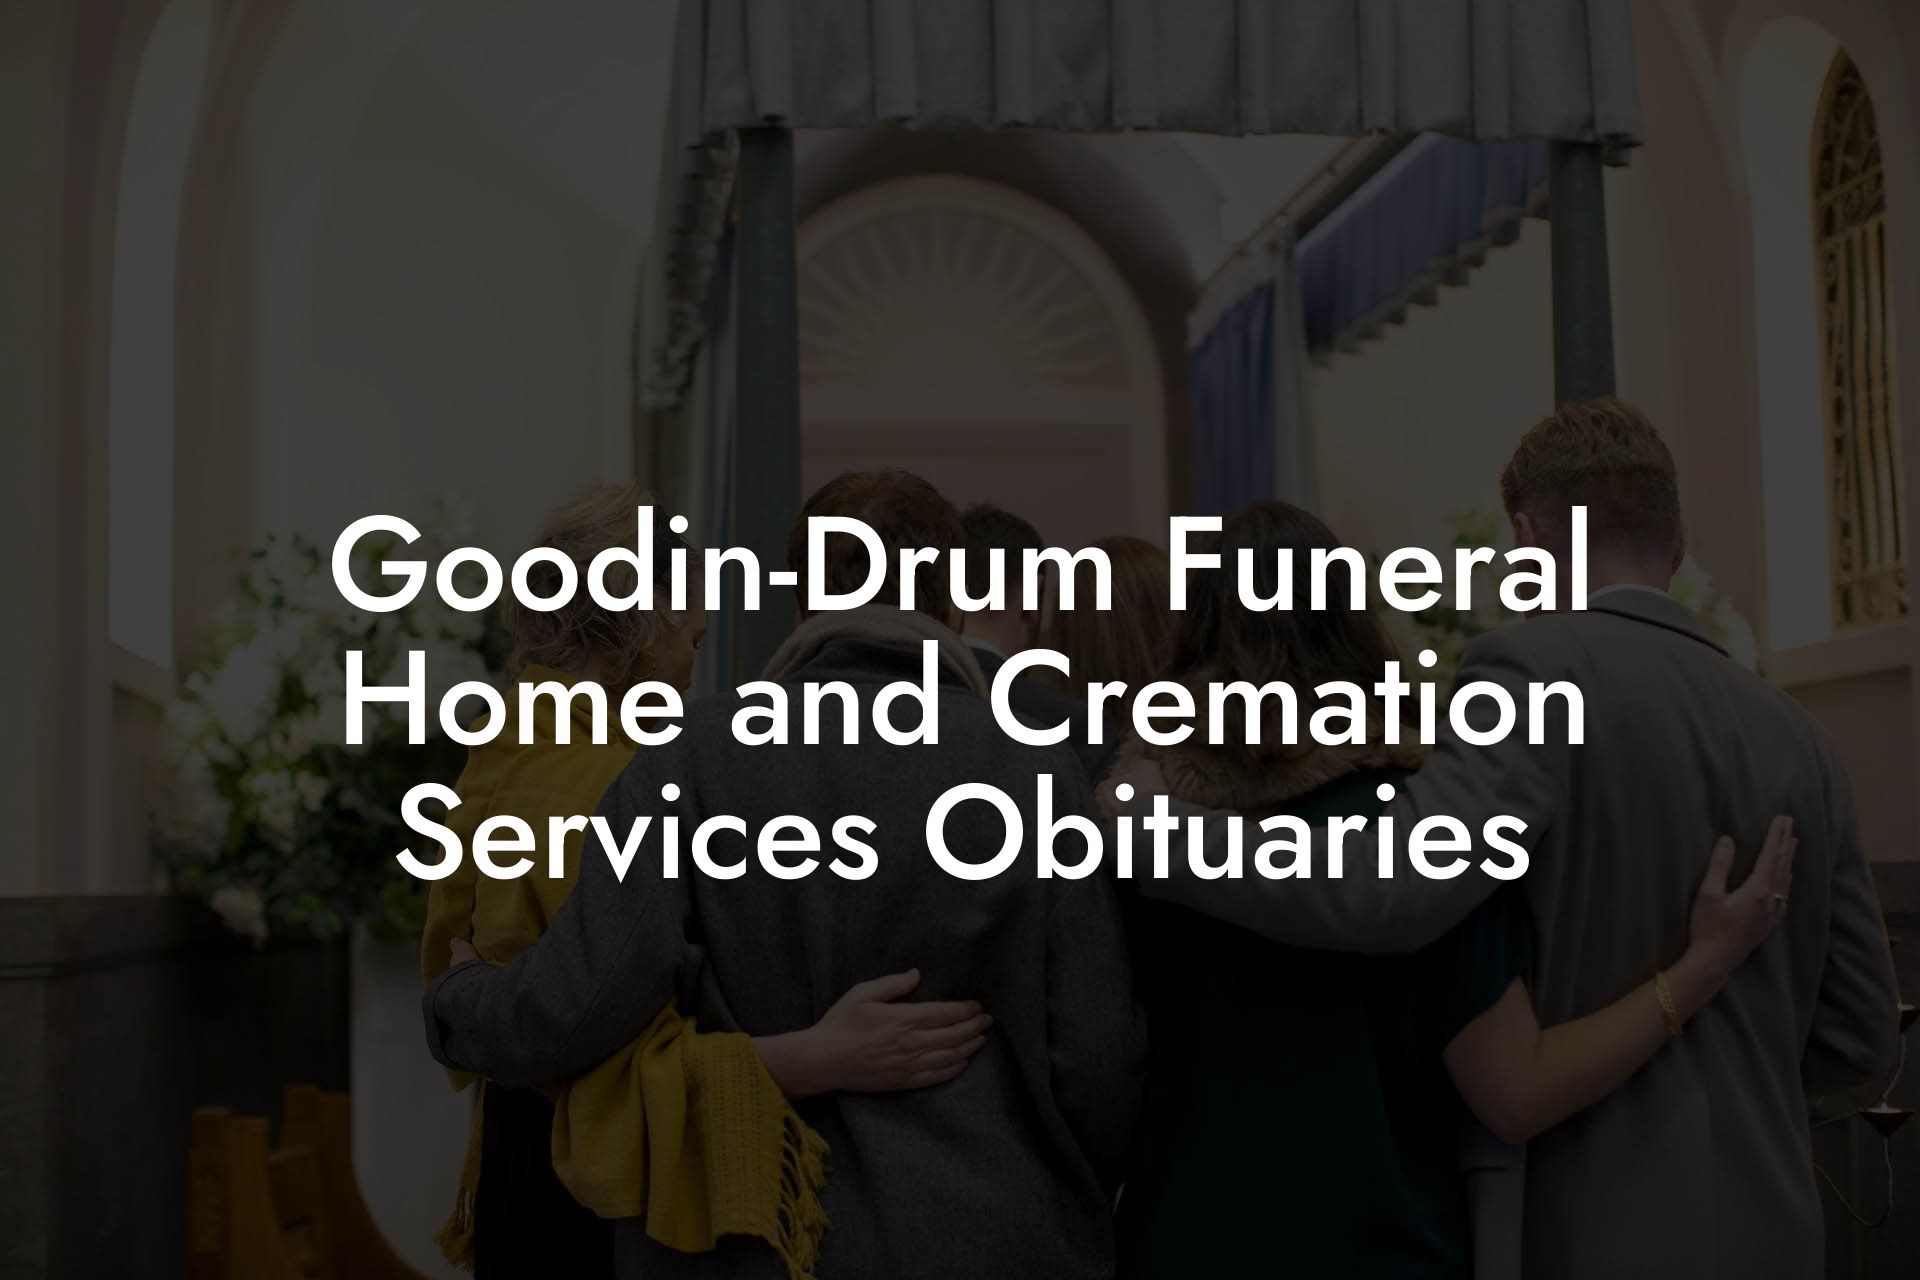 Goodin-Drum Funeral Home and Cremation Services Obituaries